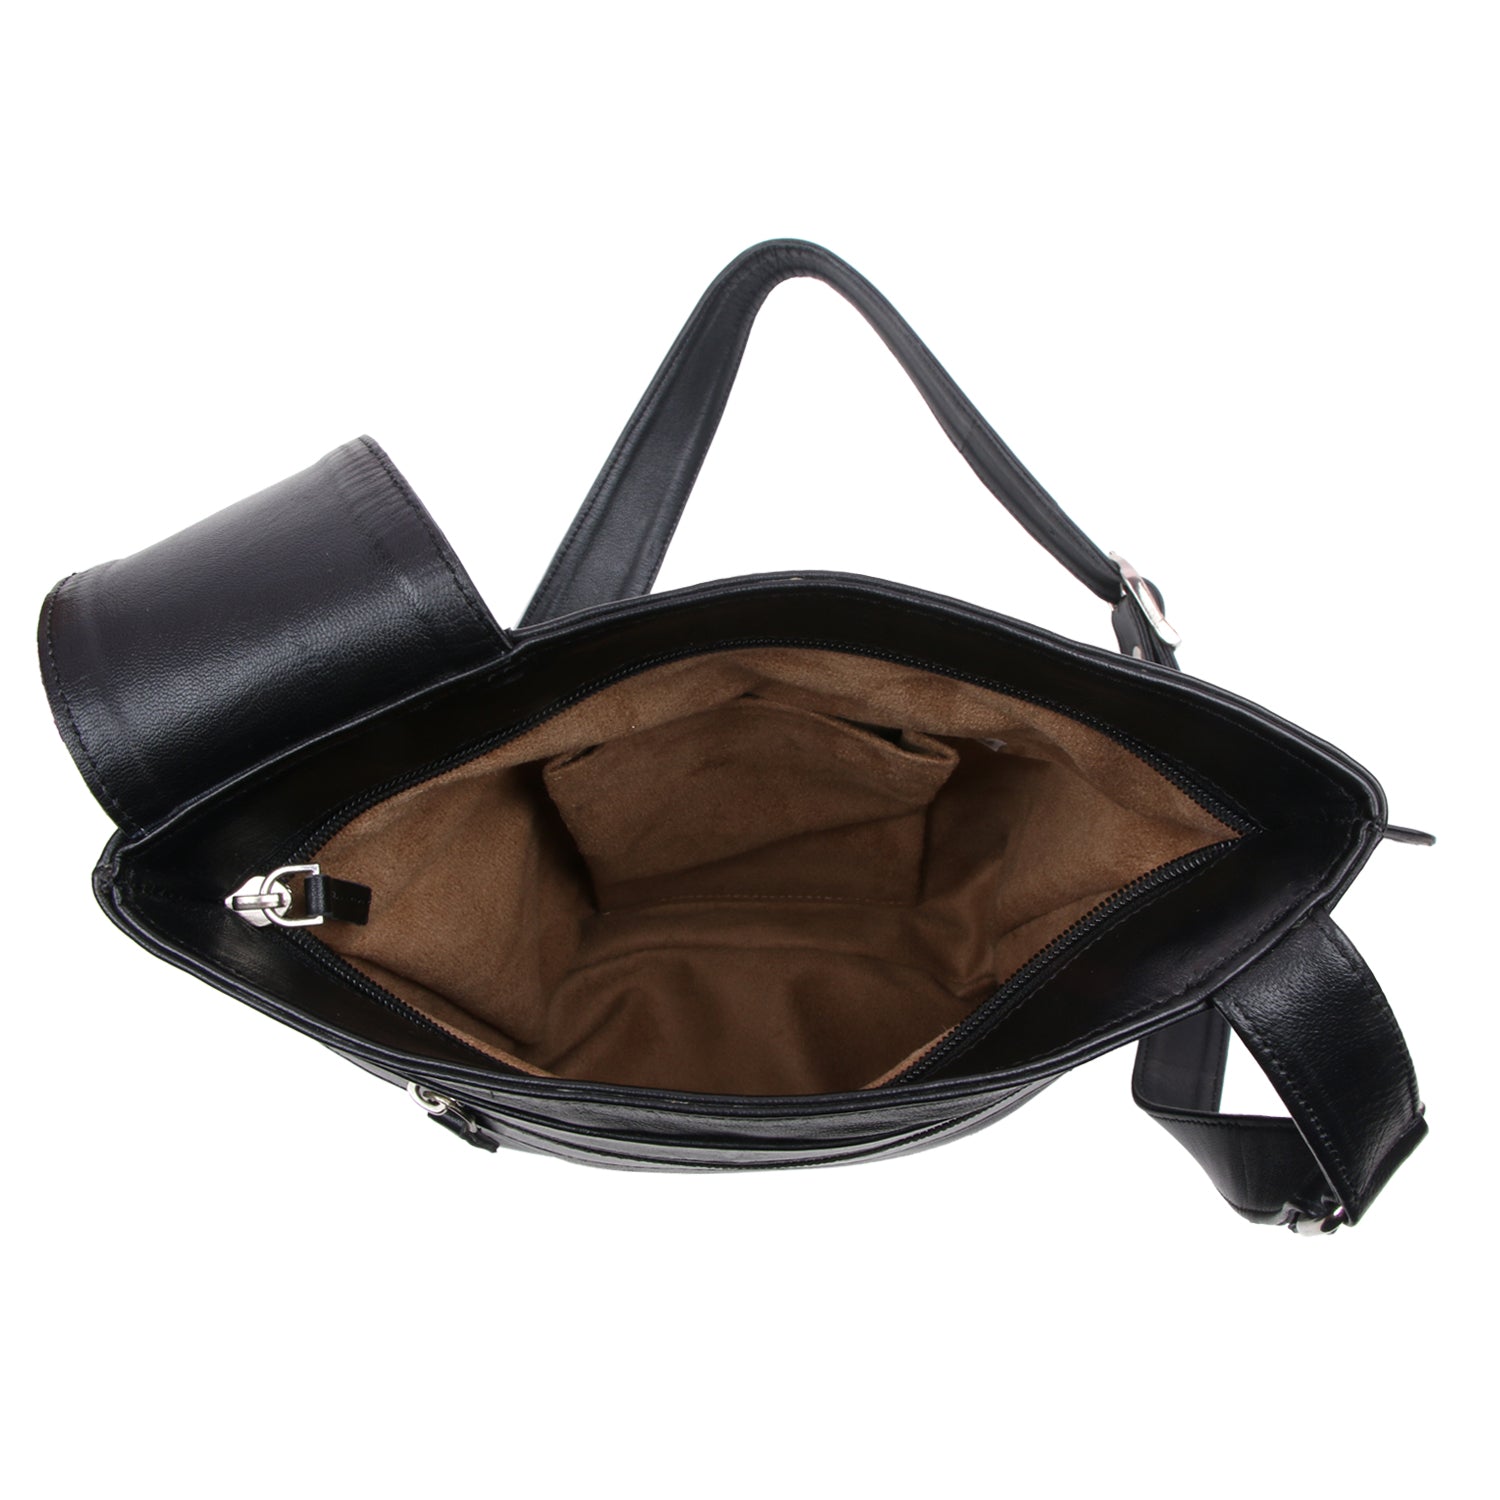 Open inside image of FLAT CROSS BODY HAND BAG. One big compartment and one small  compartment visible.